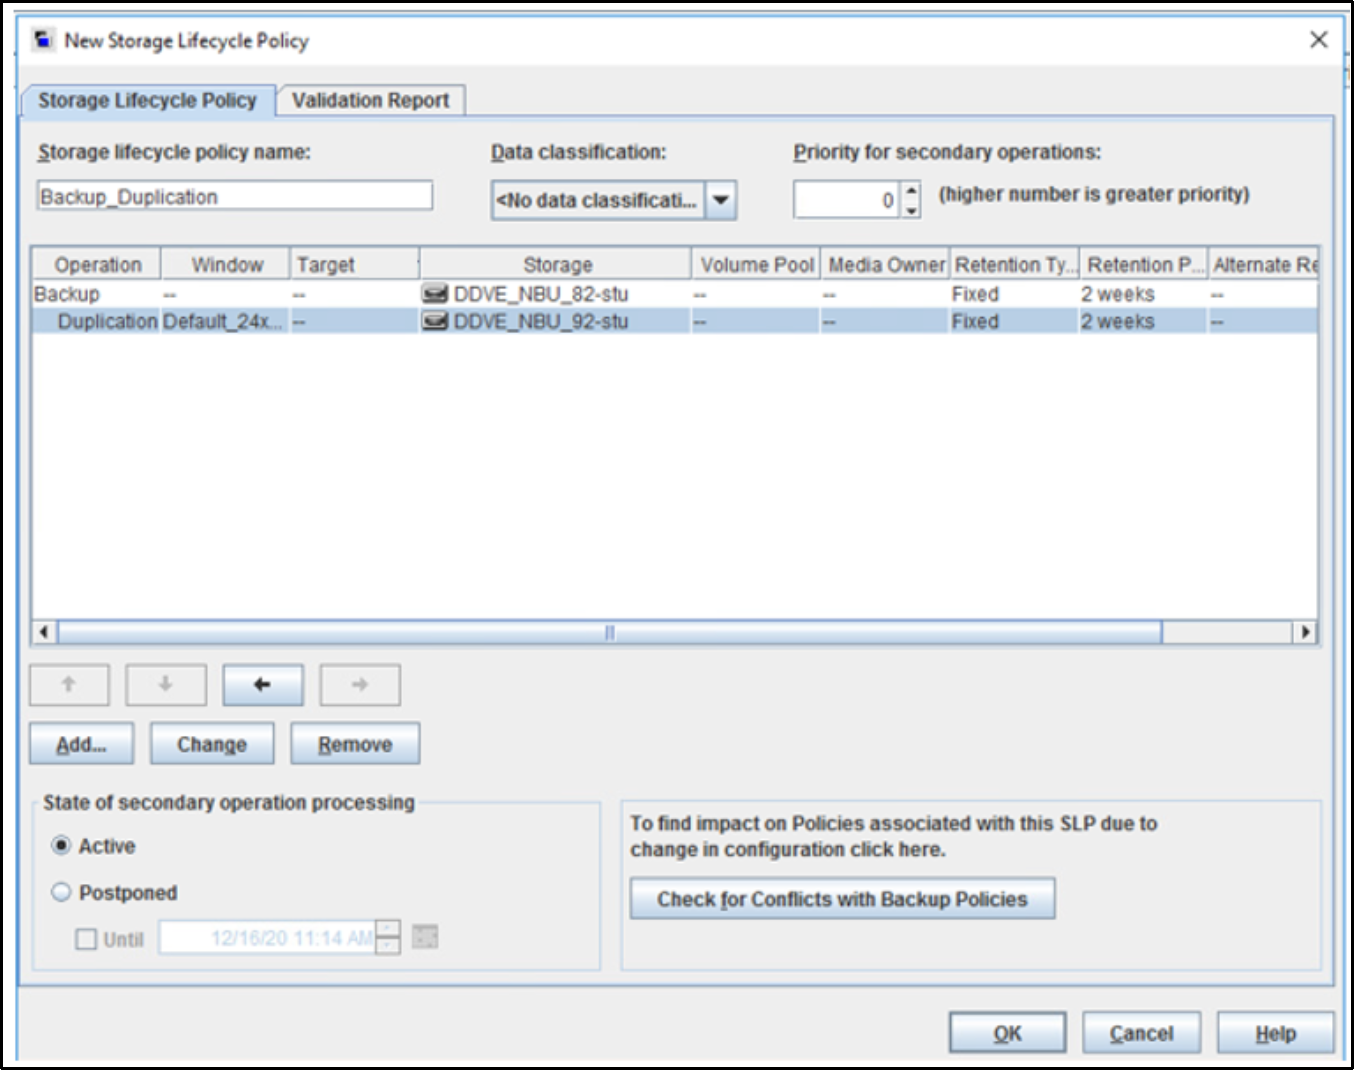 The image shows the backup and duplication operation details and to save the SLP